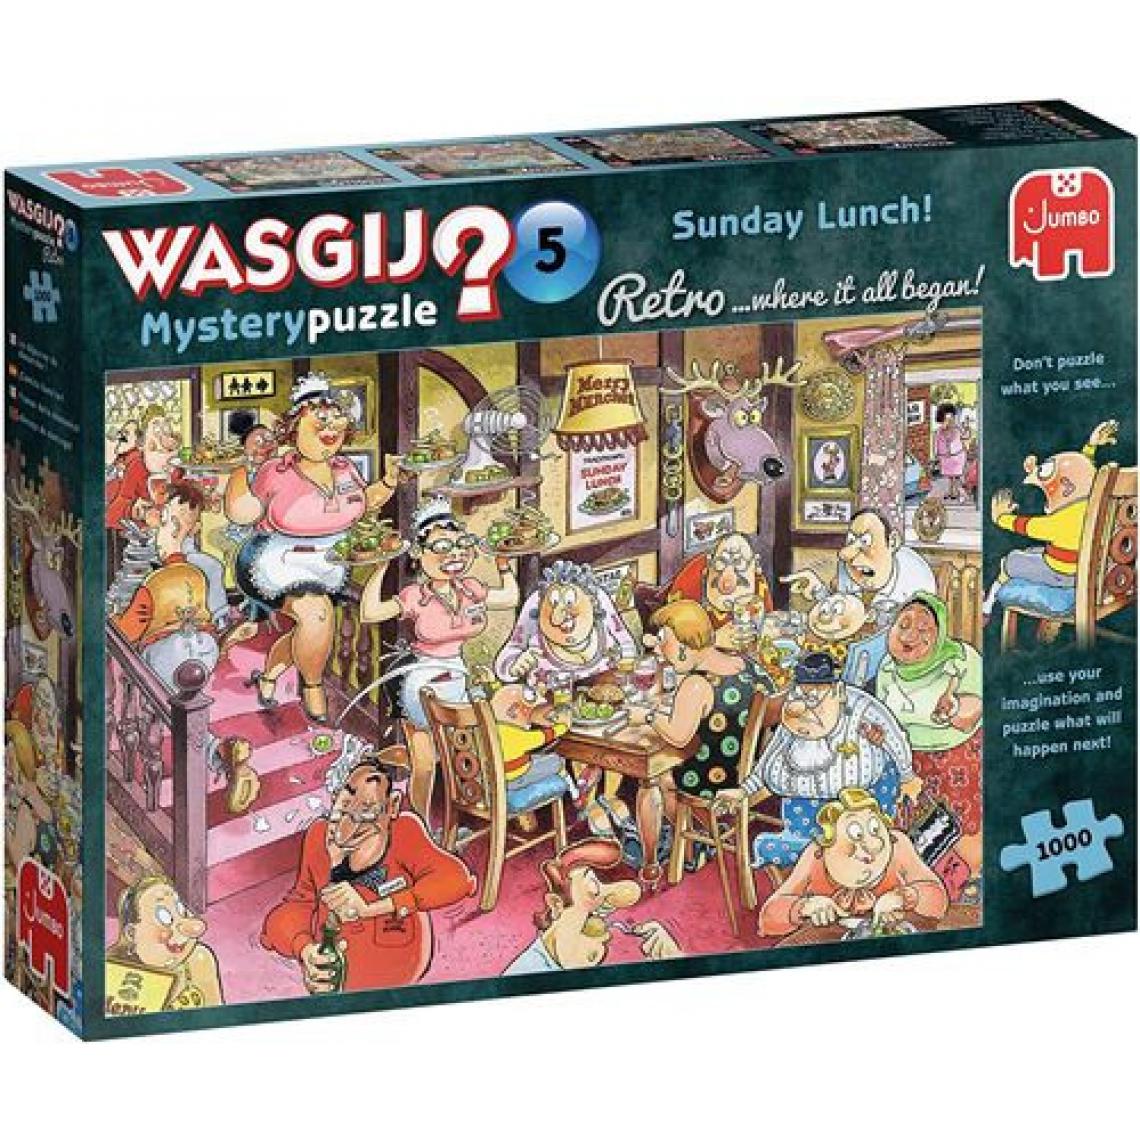 Diset - Puzzle 1000 pièces Diset Wasgij Retro Mystery 5 Sunday Lunch ! - Animaux